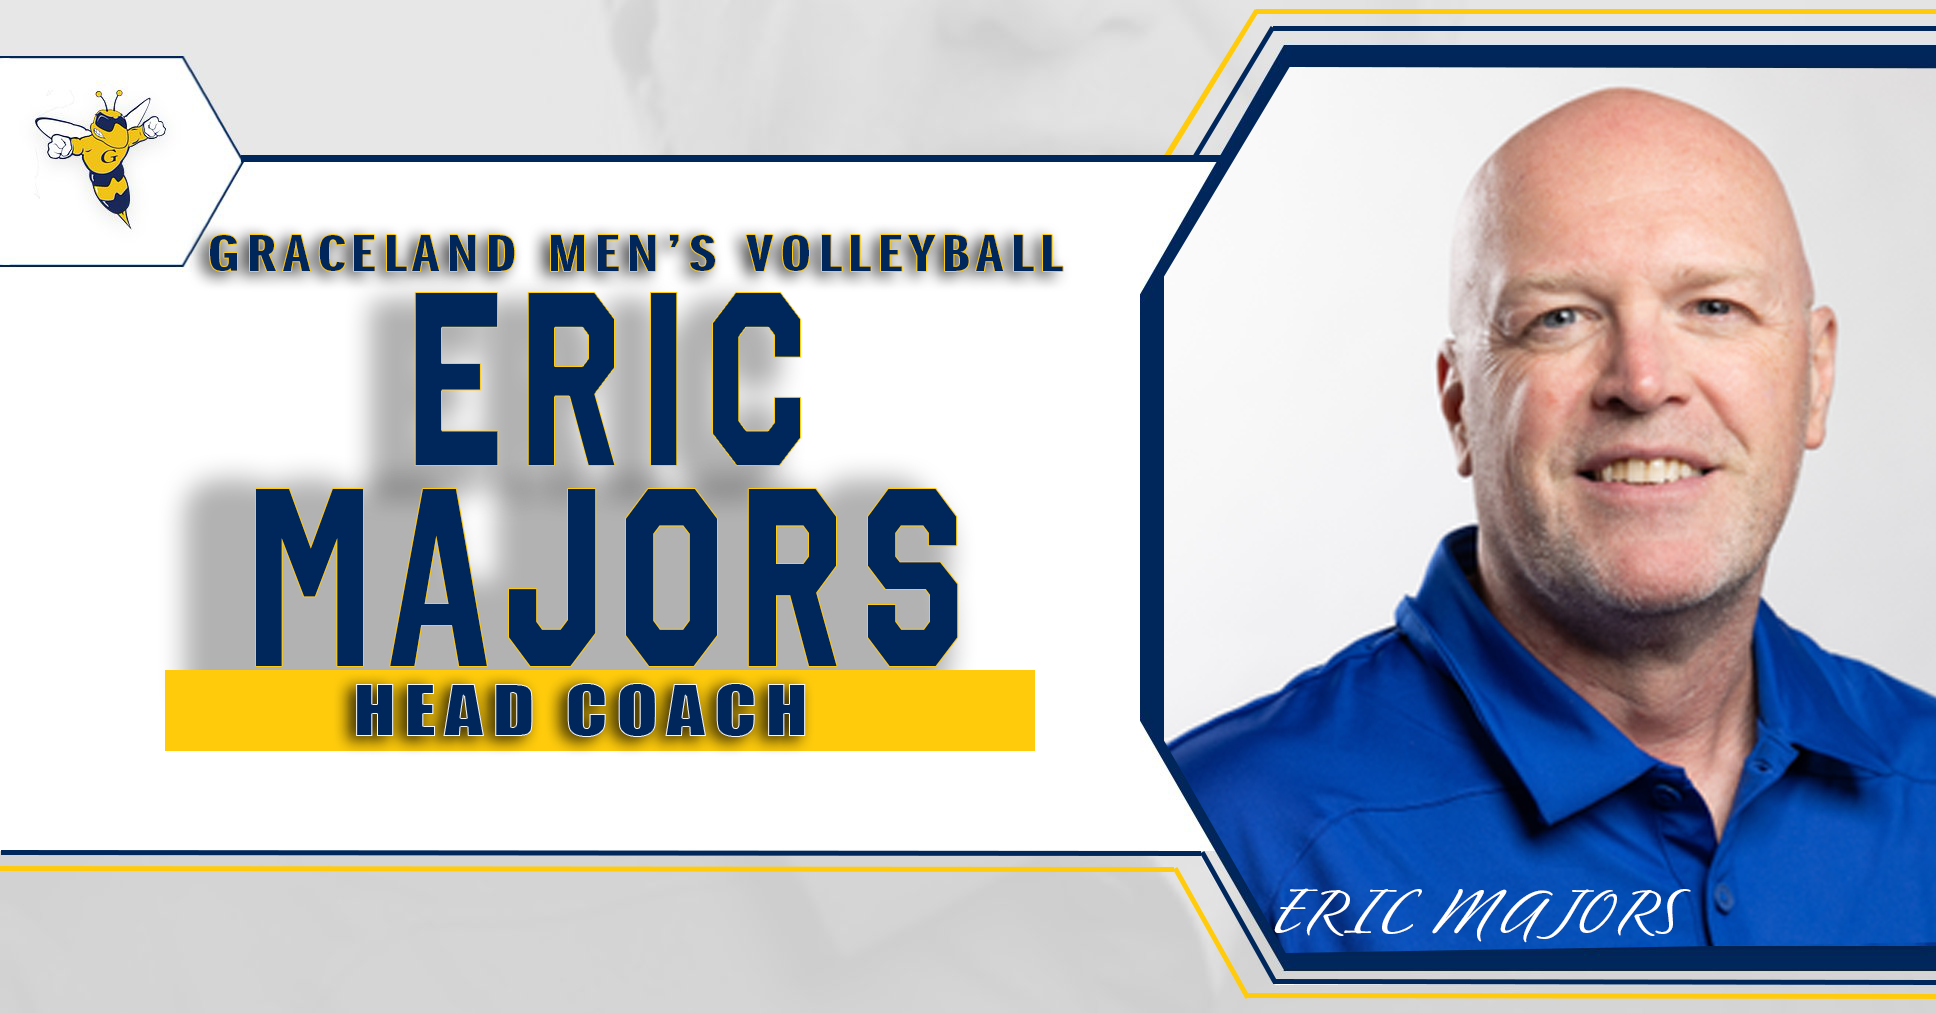 Eric Majors Joins Graceland Men’s Volleyball as Head Coach